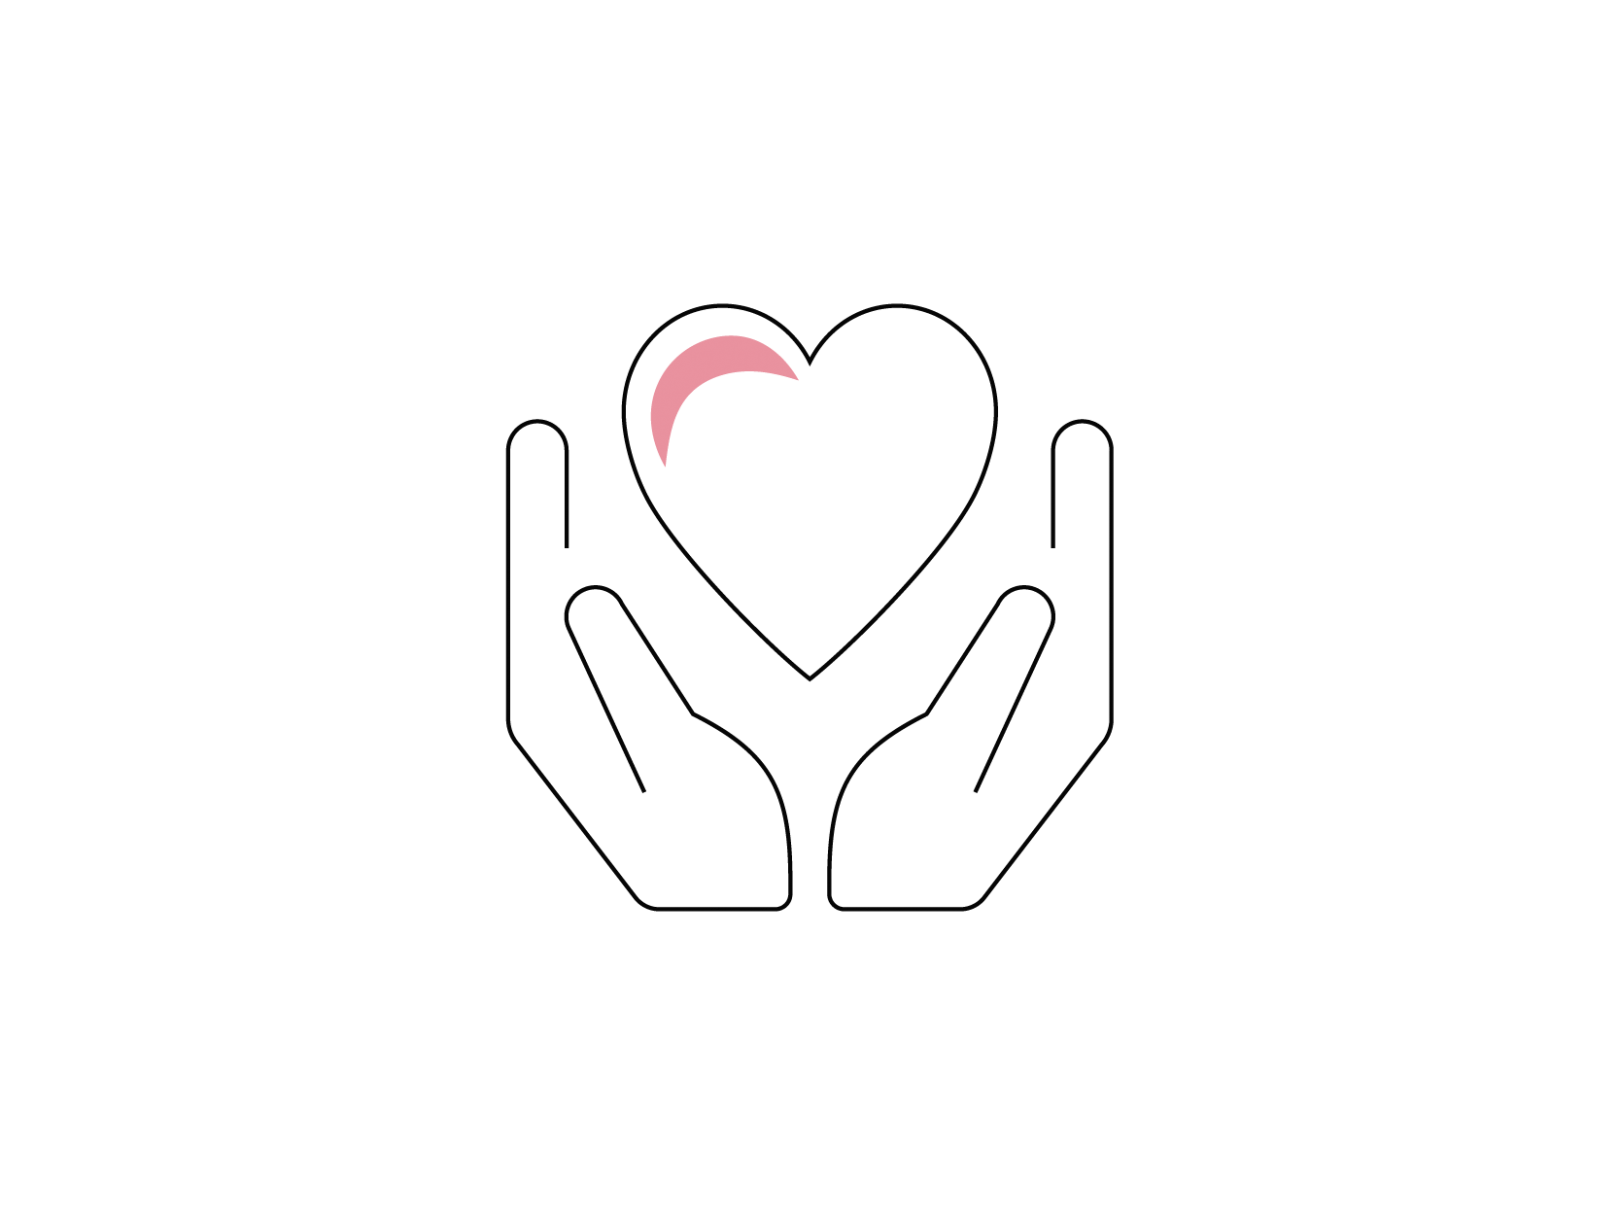 Hands holding a heart Icon